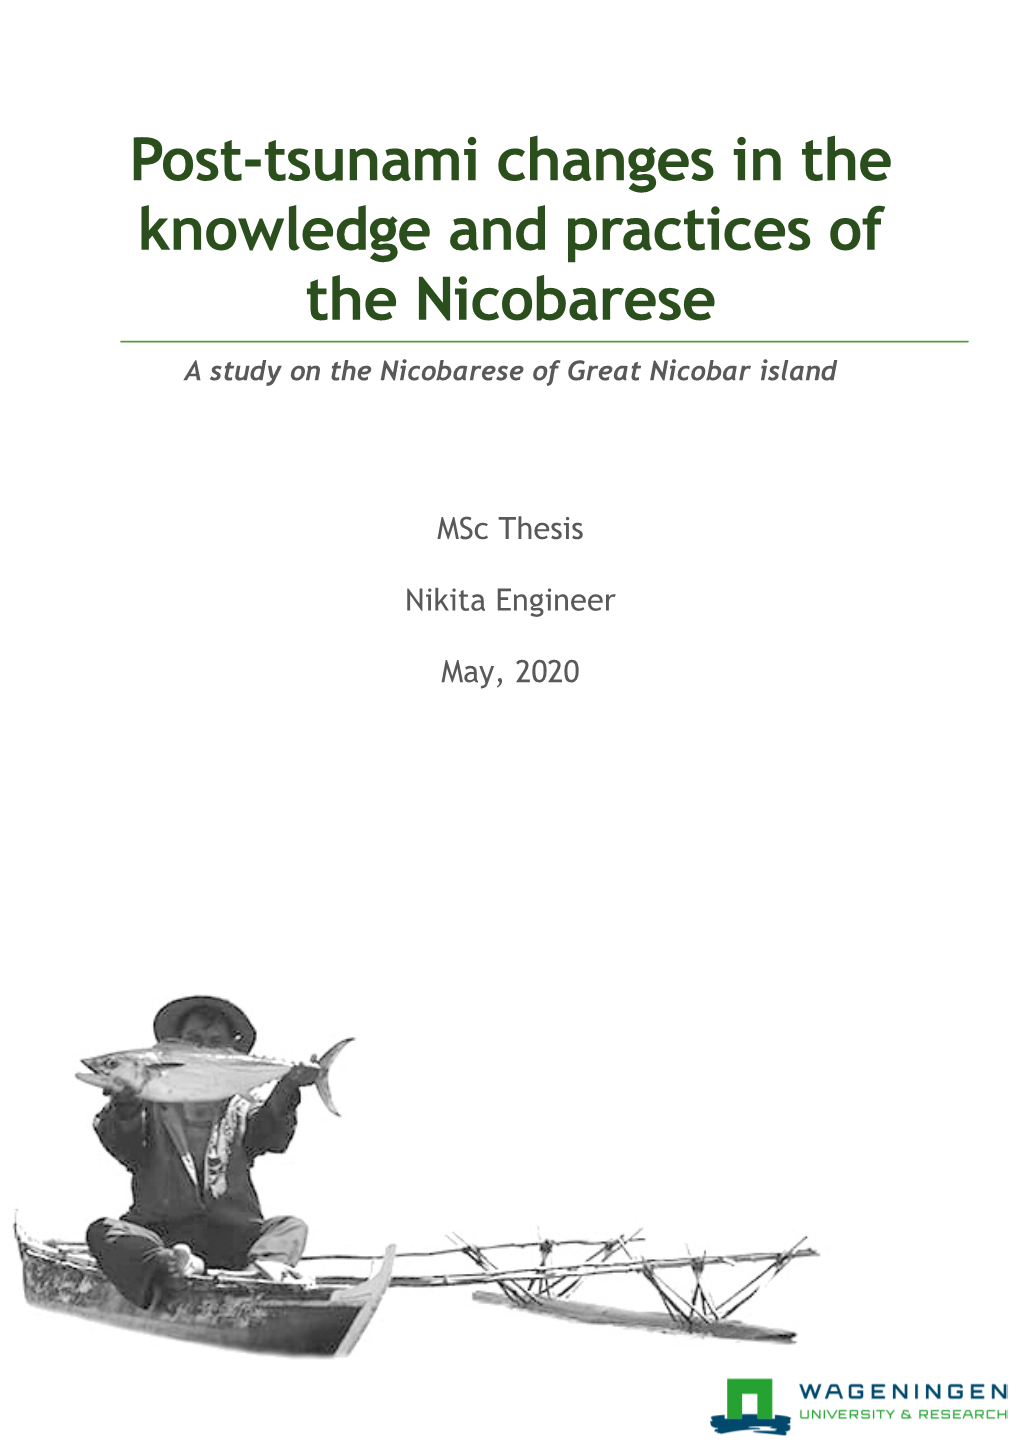 Post-Tsunami Changes in the Knowledge and Practices of the Nicobarese